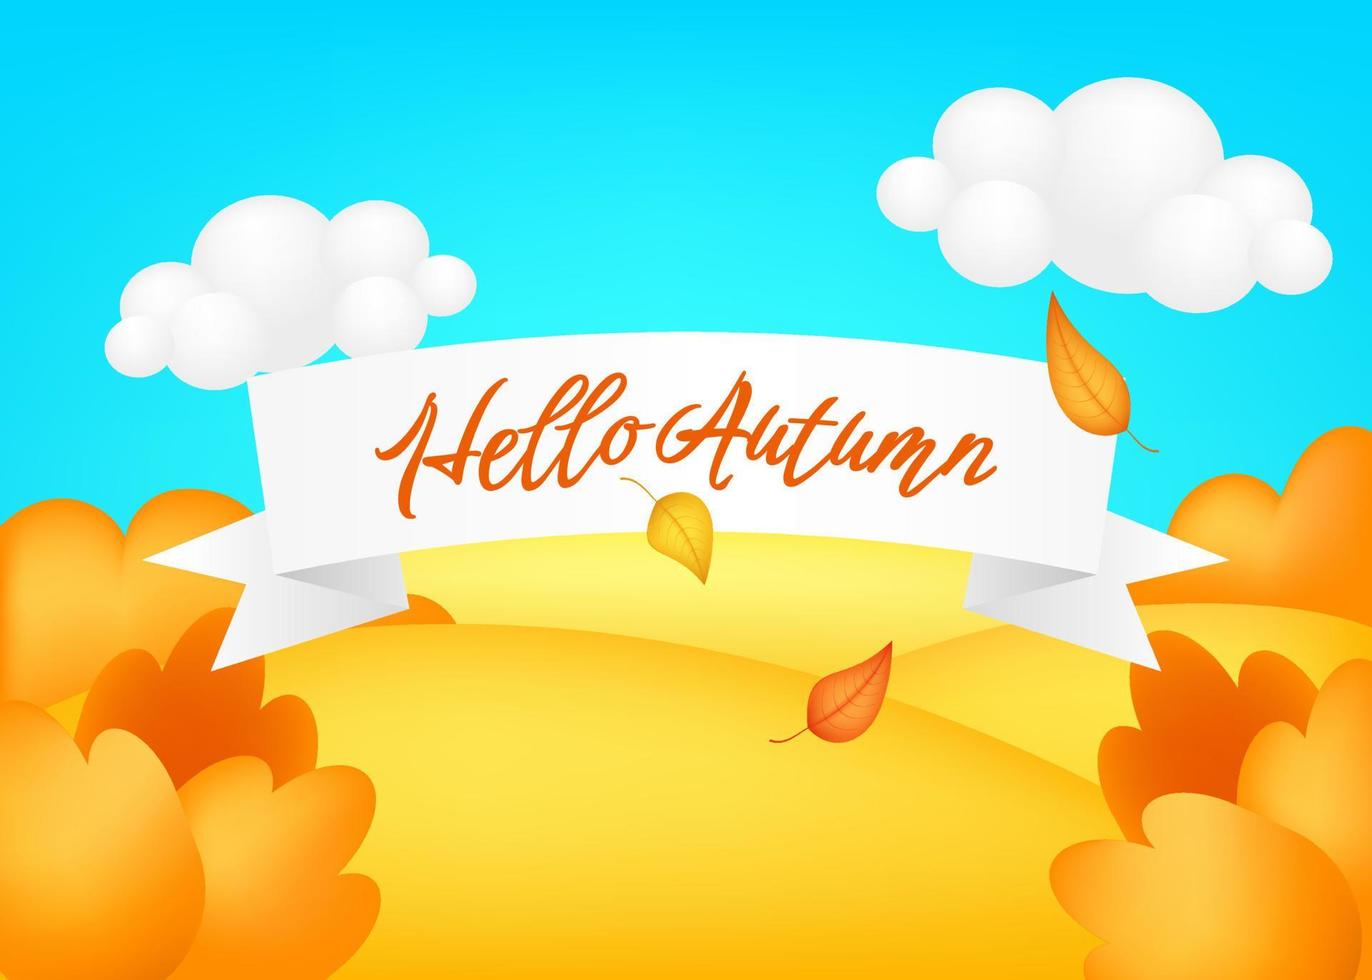 Hello autumn. Meadow 3d vector illustration. Bright landscape of harvest valley, kids background. Colorful cute scenery with fall season yellow field, trees, blue sky, clouds for children's sites.